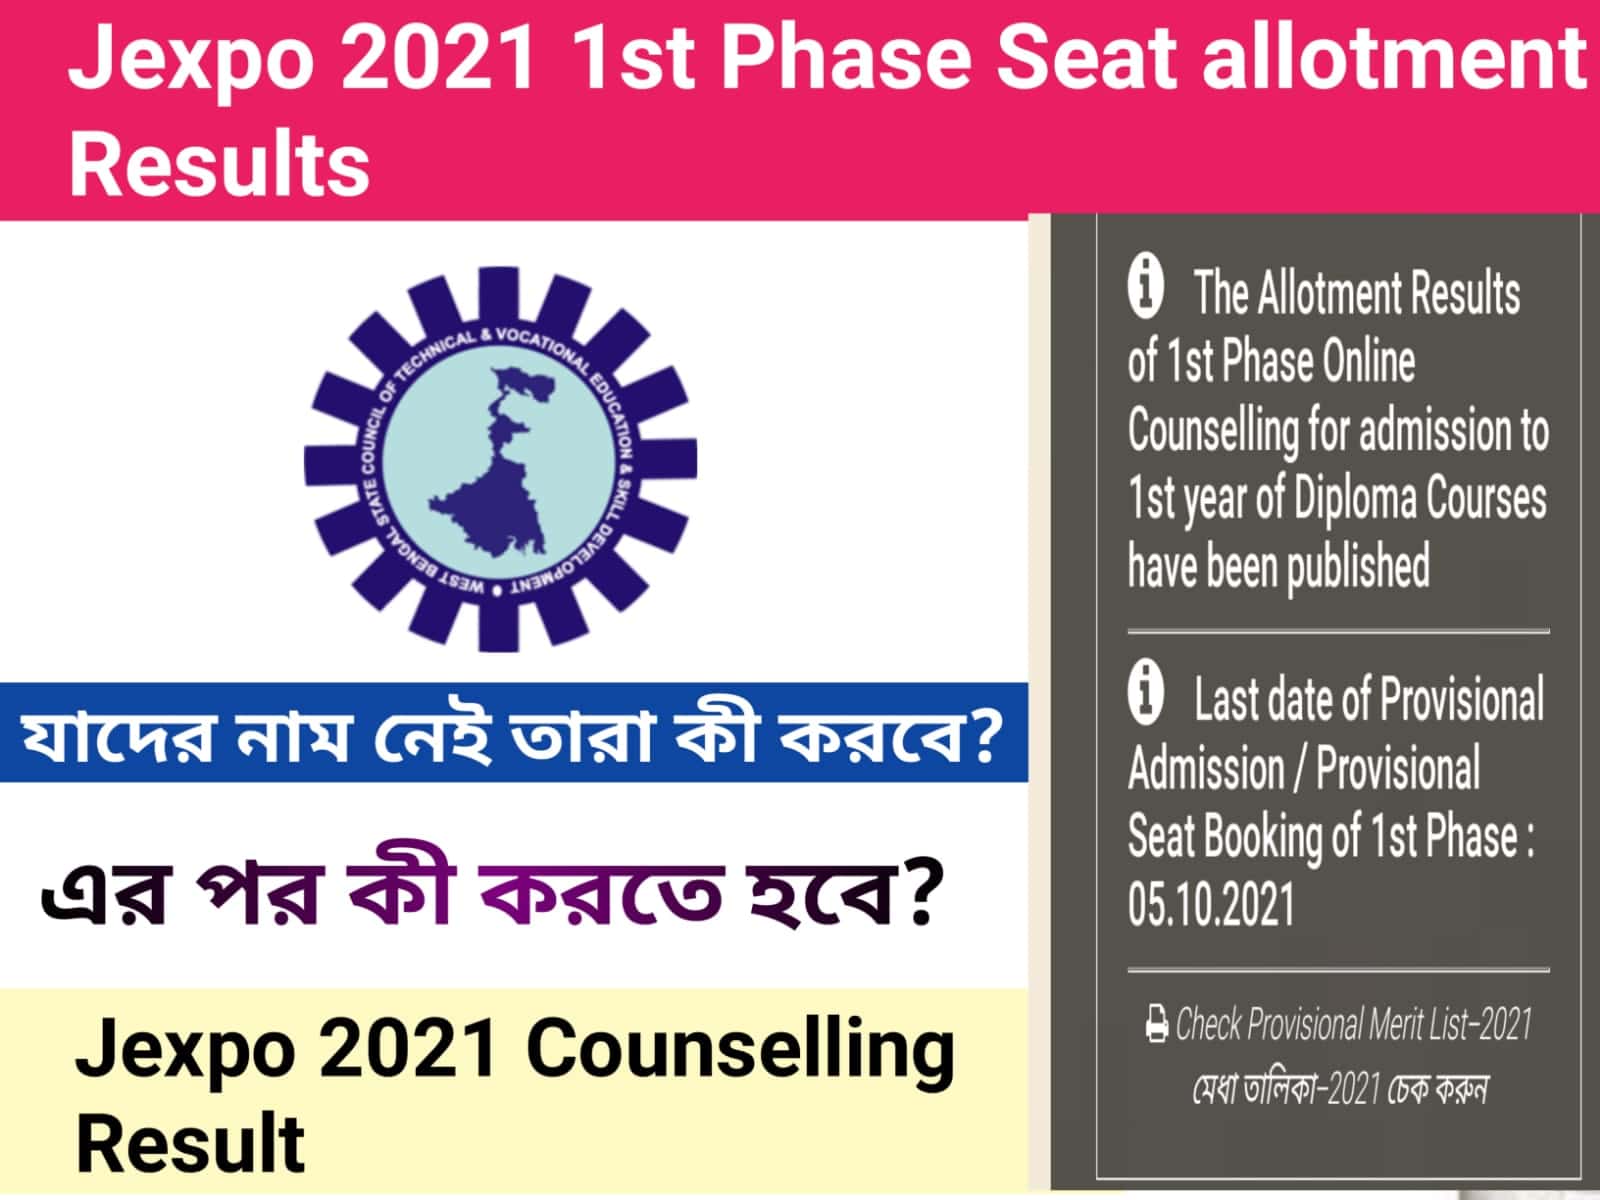 Jexpo 2021 1st Phase Seat Allotment Result Out | what is the Next Step for Admission? | Jexpo & Voclet 2021 seat allotment - Post Image